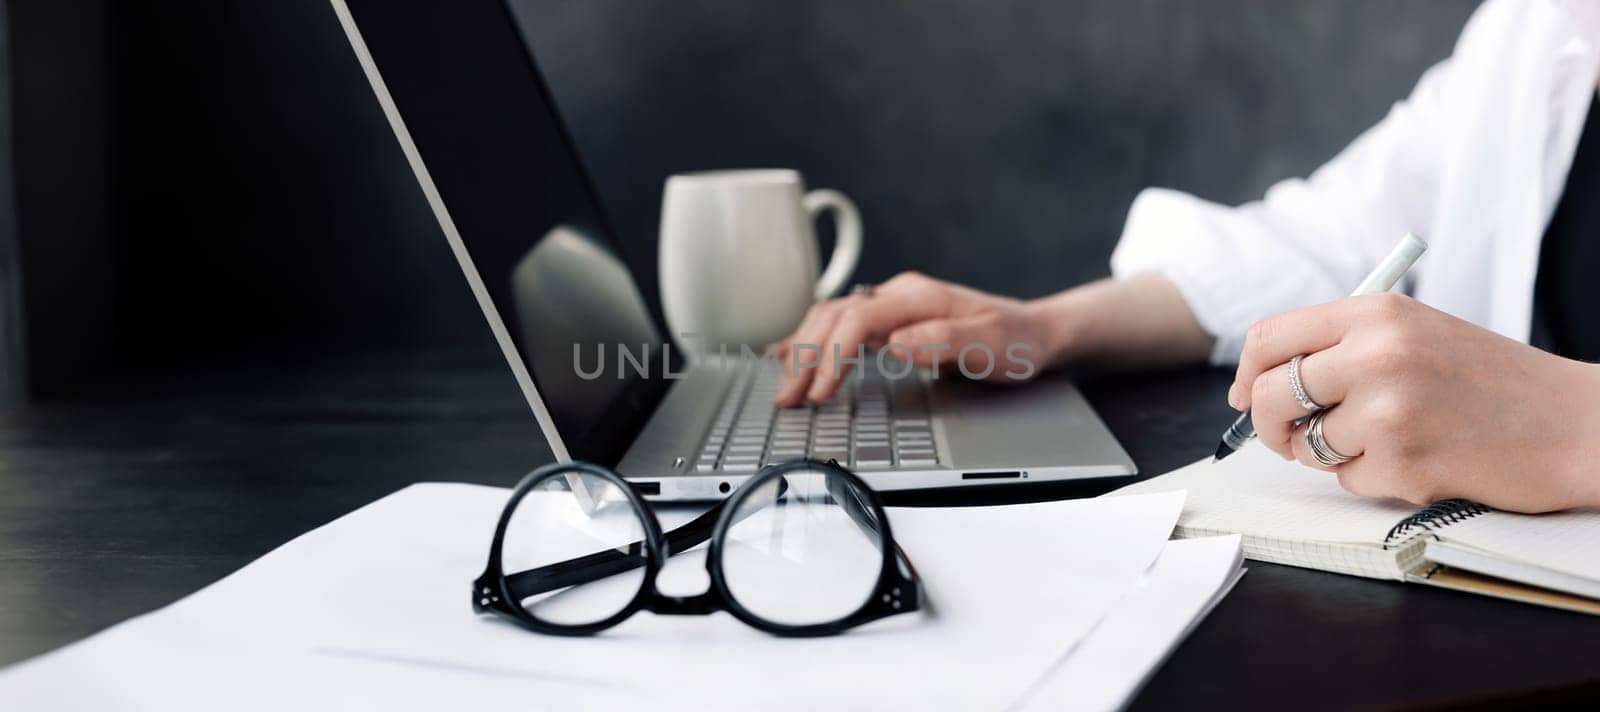 Focused Professional. Woman Journalist or Businesswoman at Work in Office. Strategic Planning. Woman Professional in Office Environment. Dedicated Journalist in Action. Woman at Office Workspace.